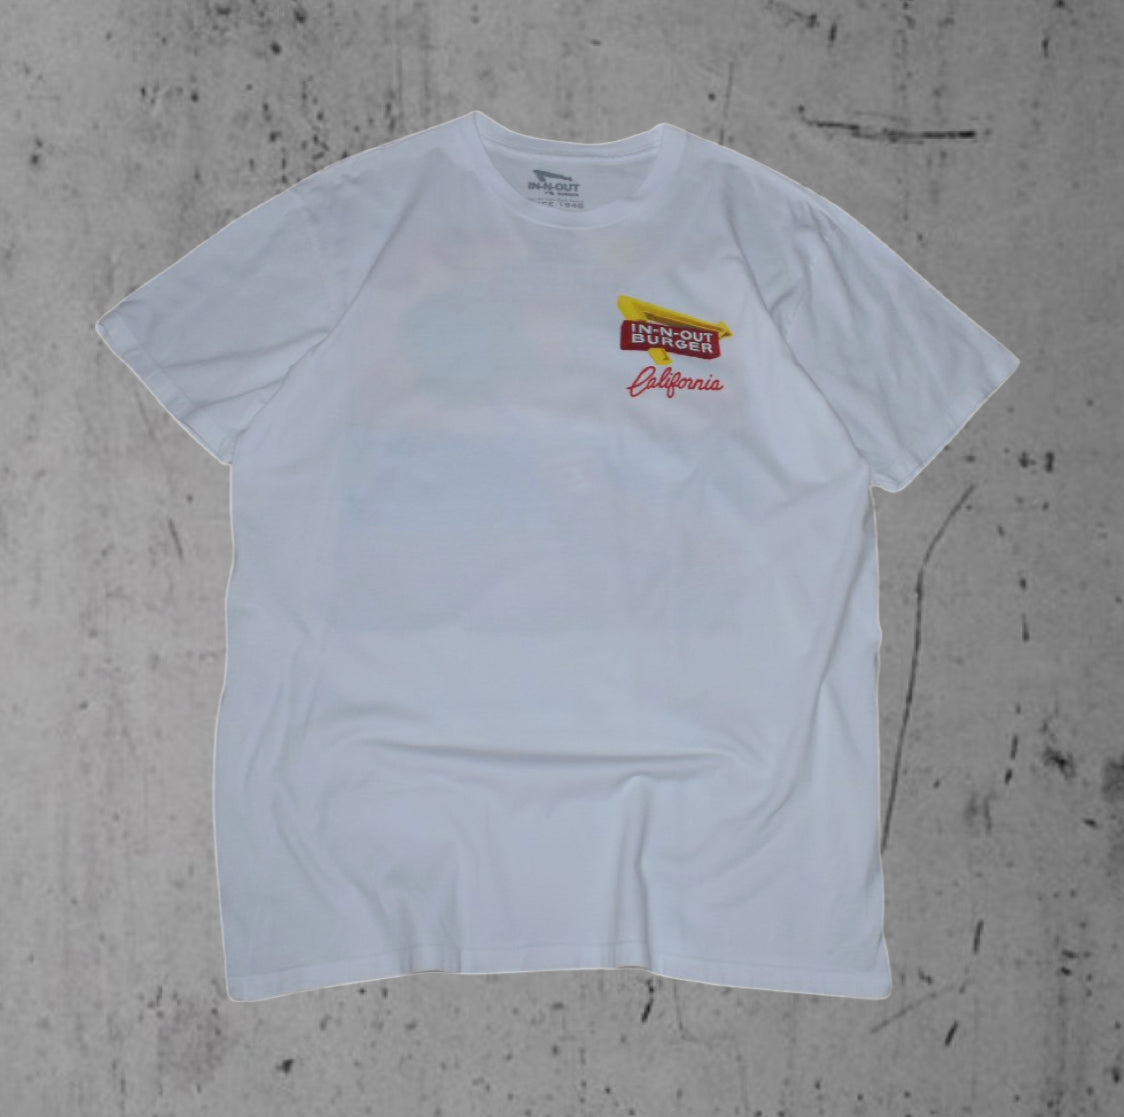 In-n-Out Burger California Tee (L)